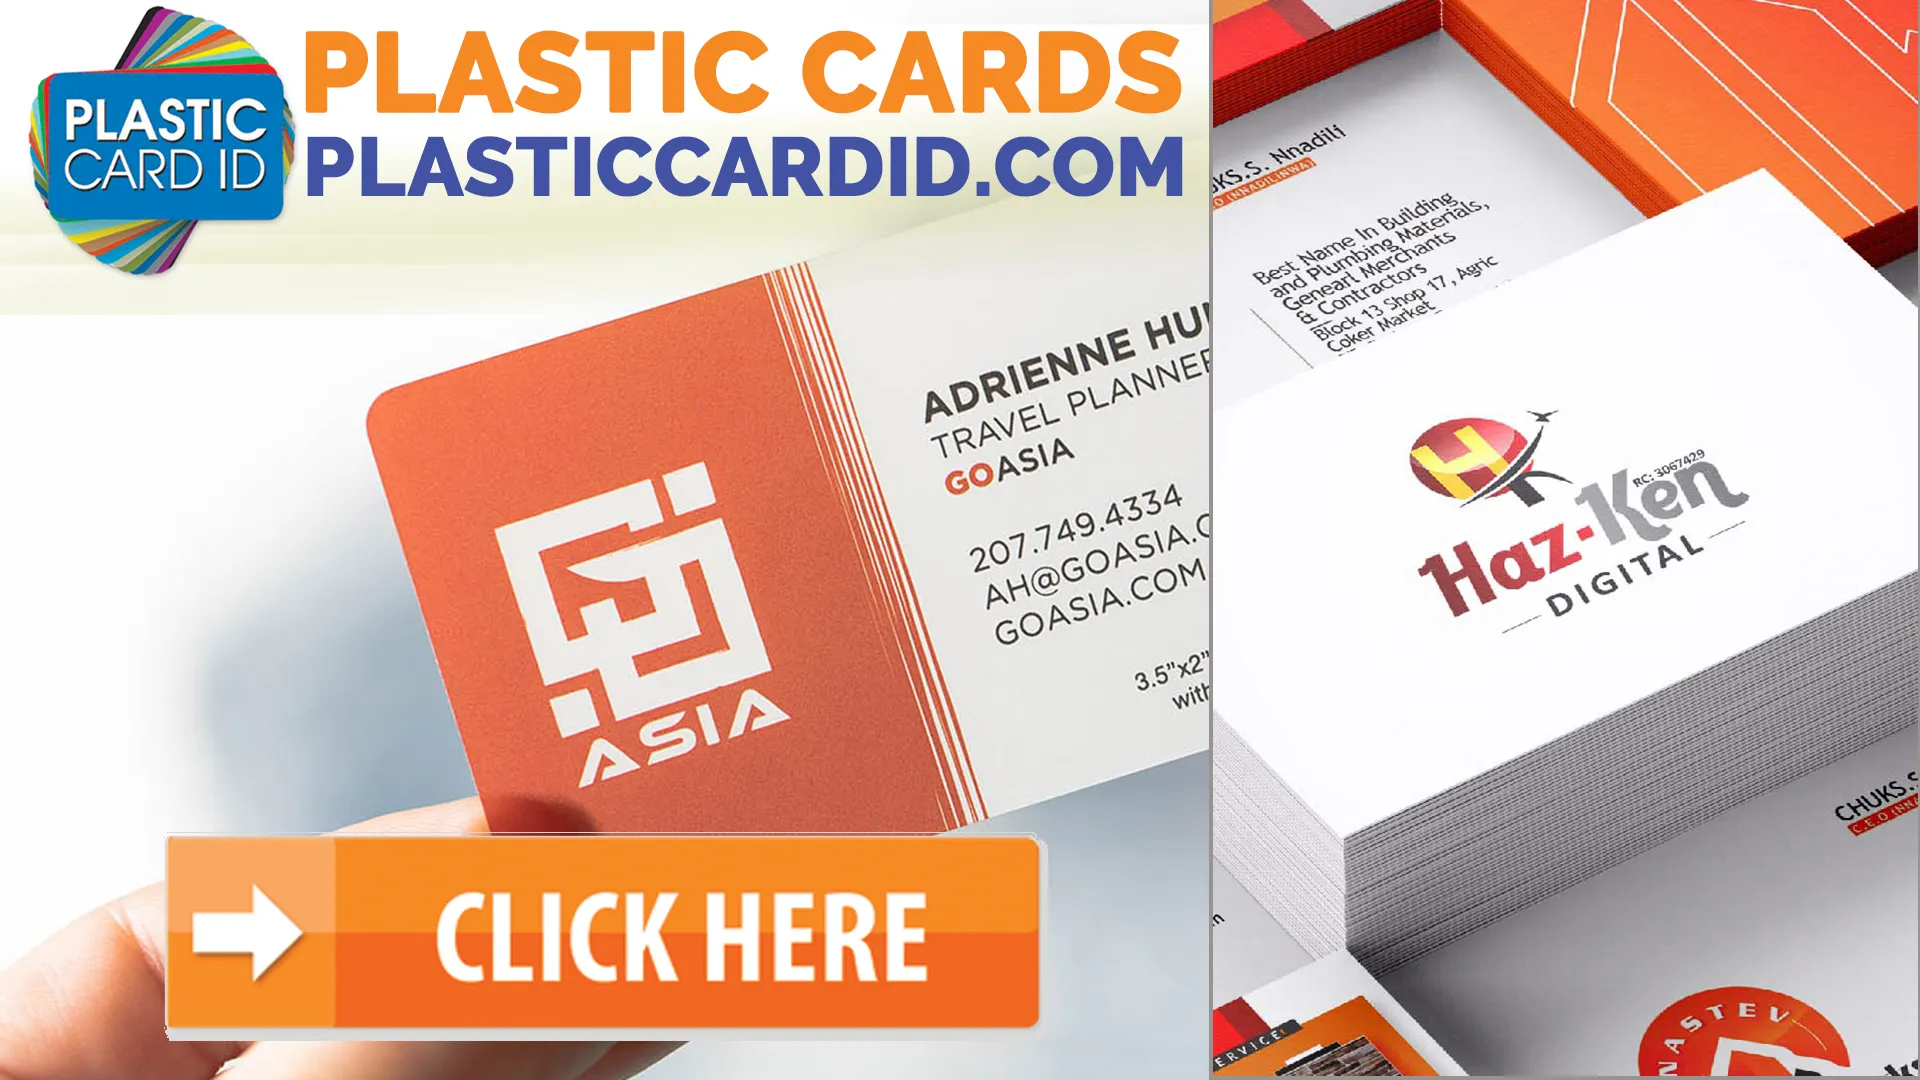 Comprehensive Card Products & Services